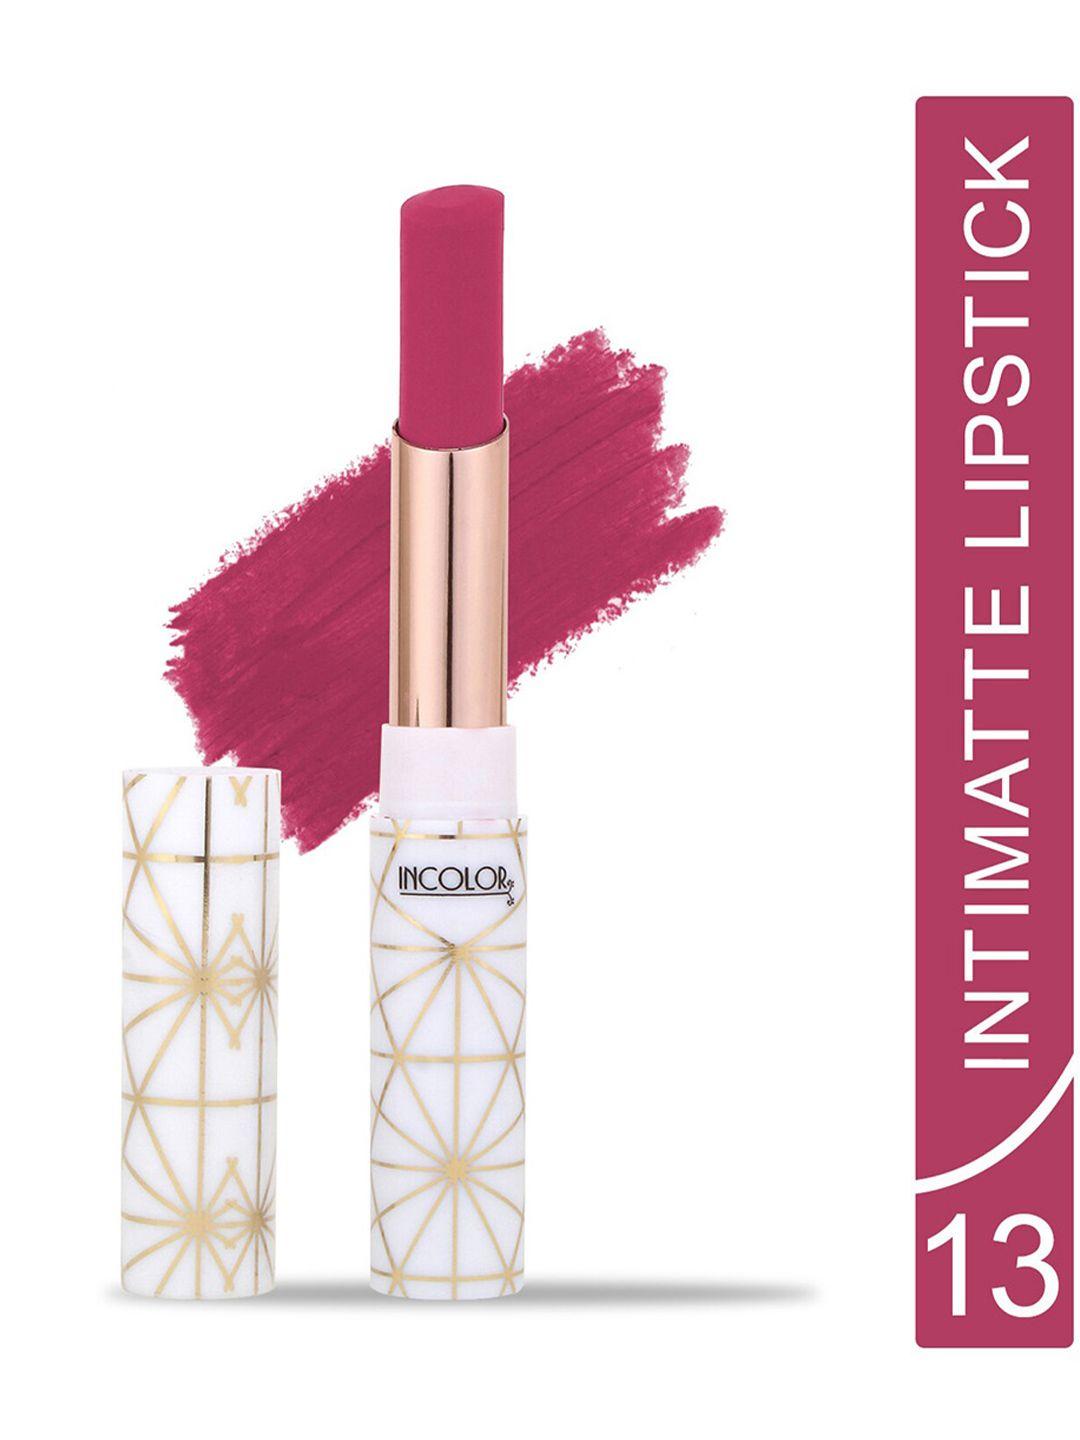 incolor intimatte lightweight long lasting smooth texture lipstick 2.3g - shade 13